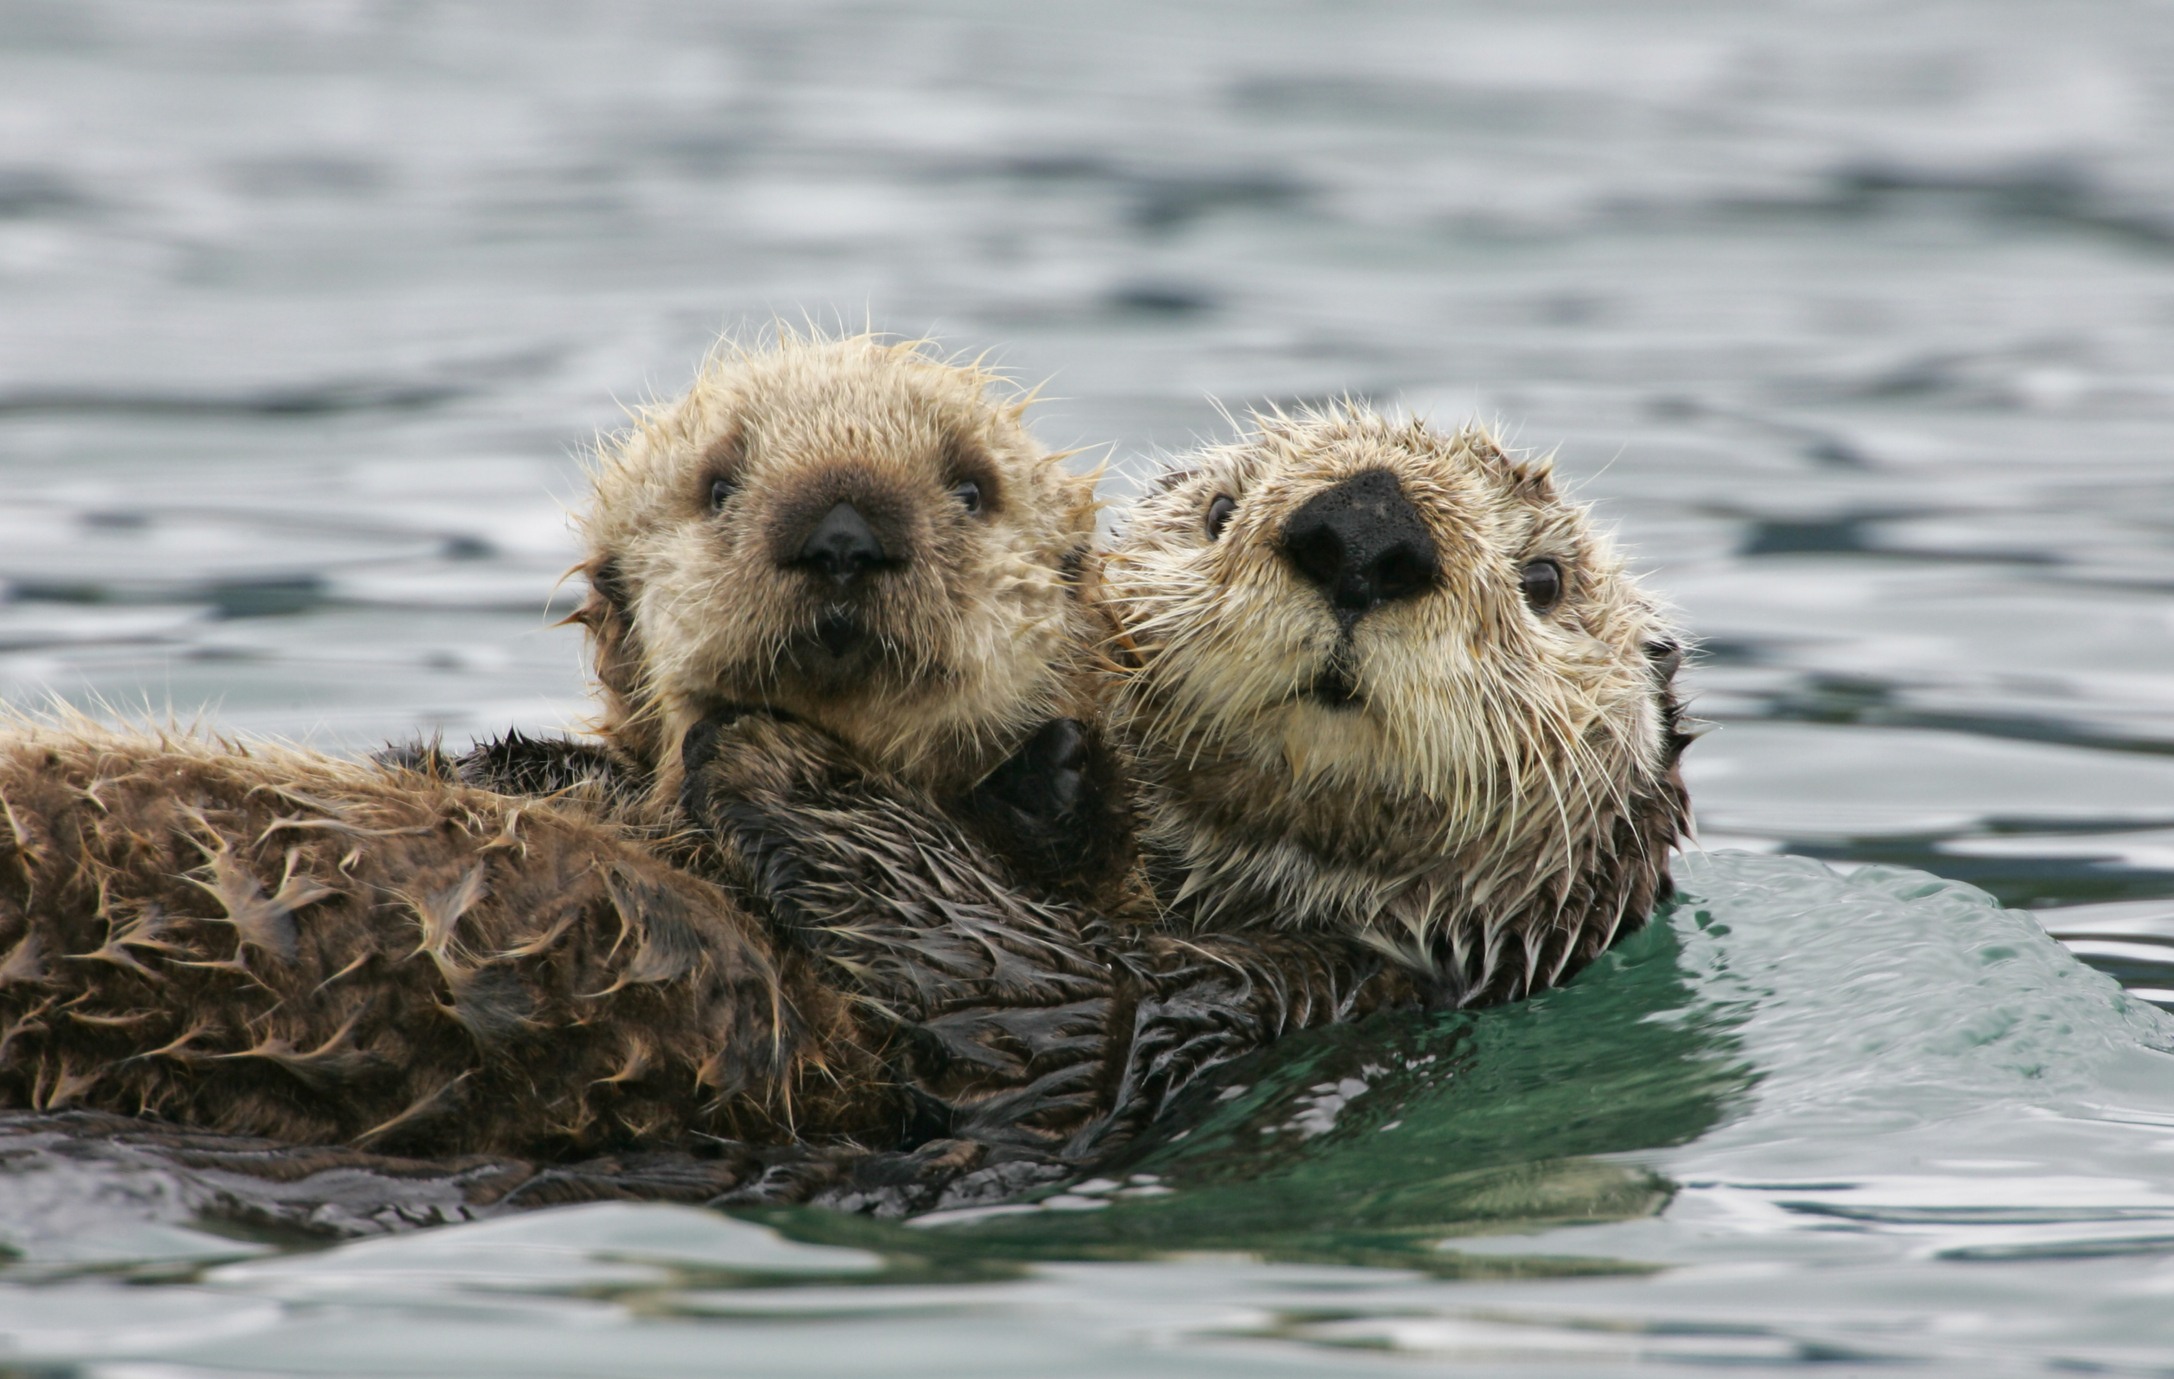 How Otters' Muscles Enable Their Cold, Aquatic Life - Texas A&M Today